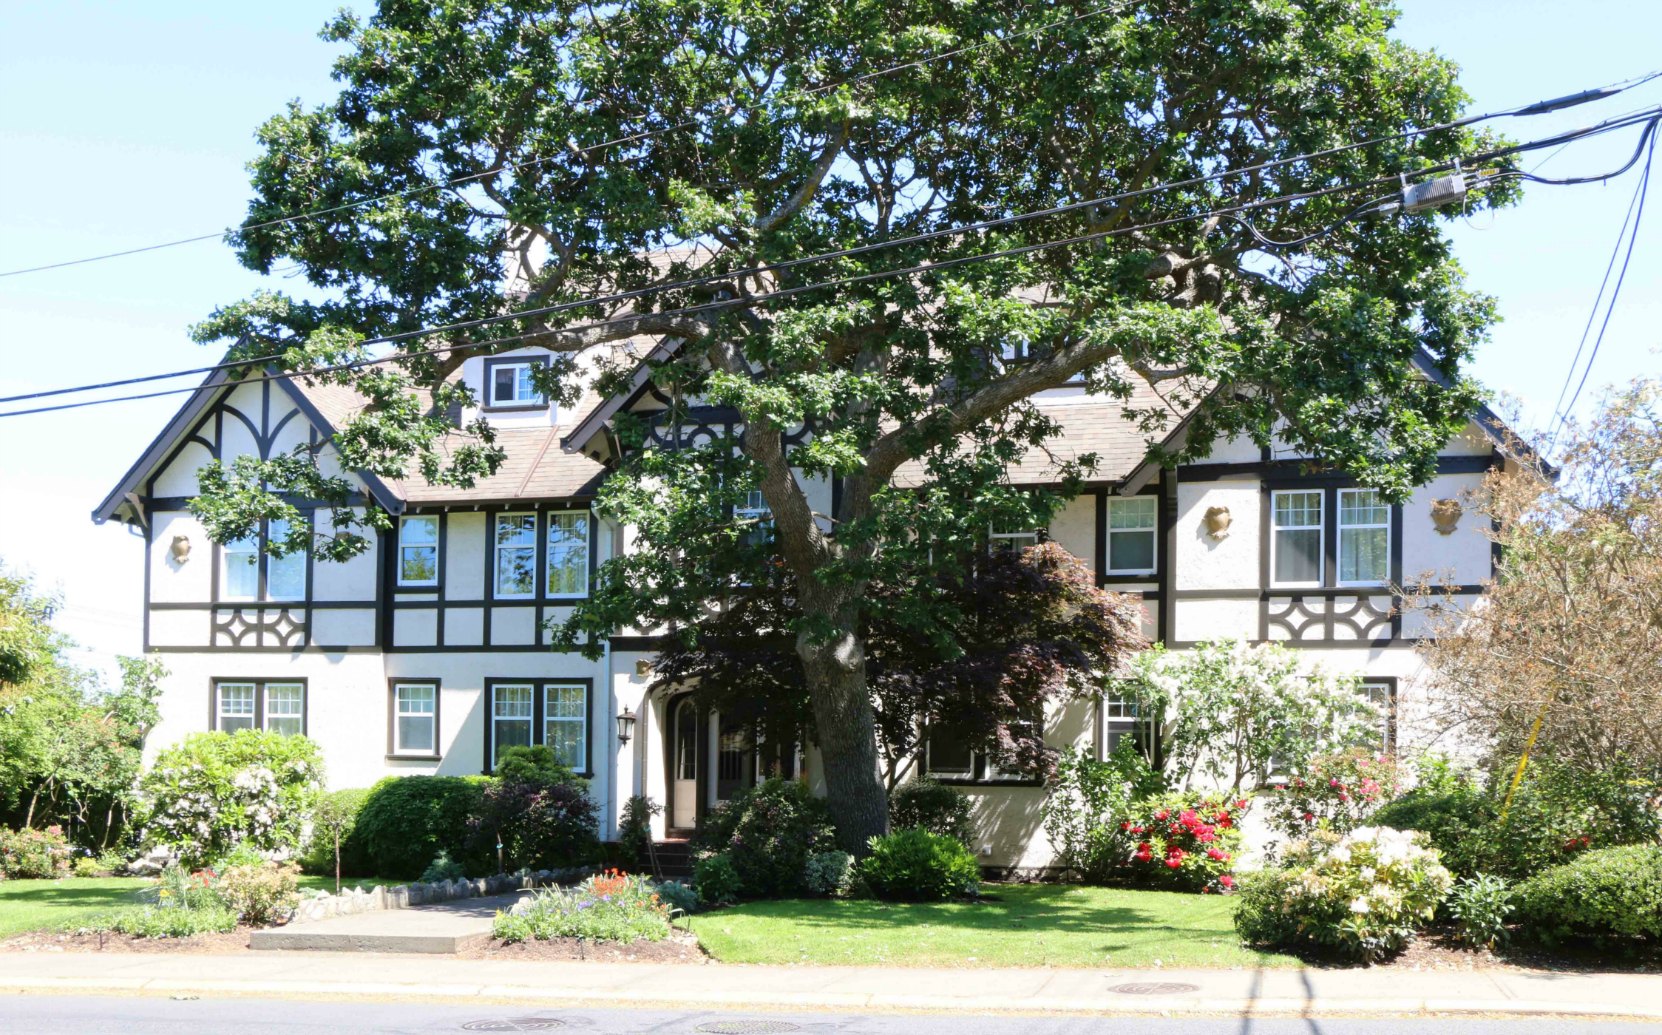 The Harrowgate Apartments, 1203 Beach Drive, was built in 1929-30 and is the last remaining example of the early 20th century apartment buildings which once stood along Beach Drive.